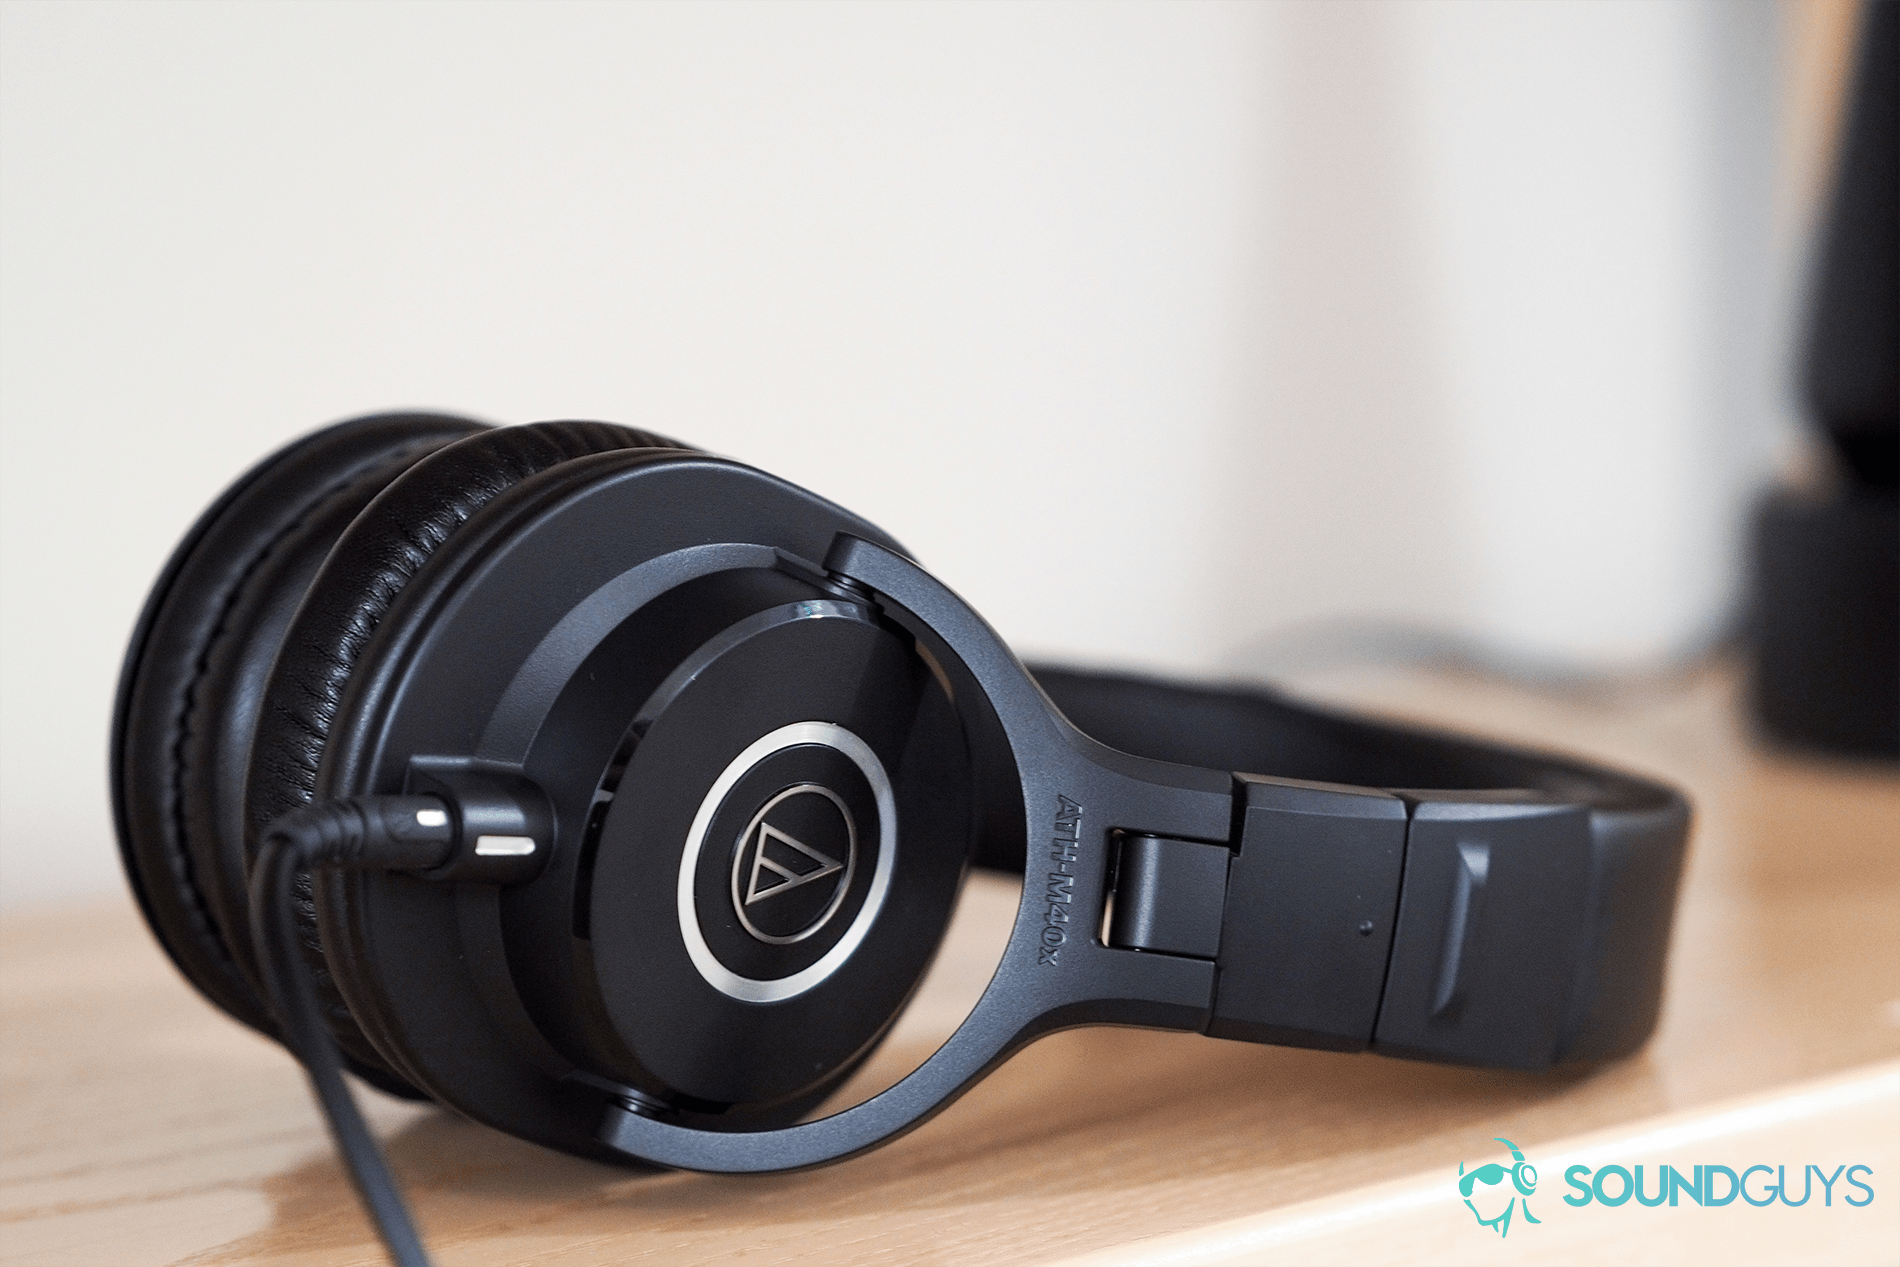 The Audio-Technica ATH-M40x on a wooden shelf.